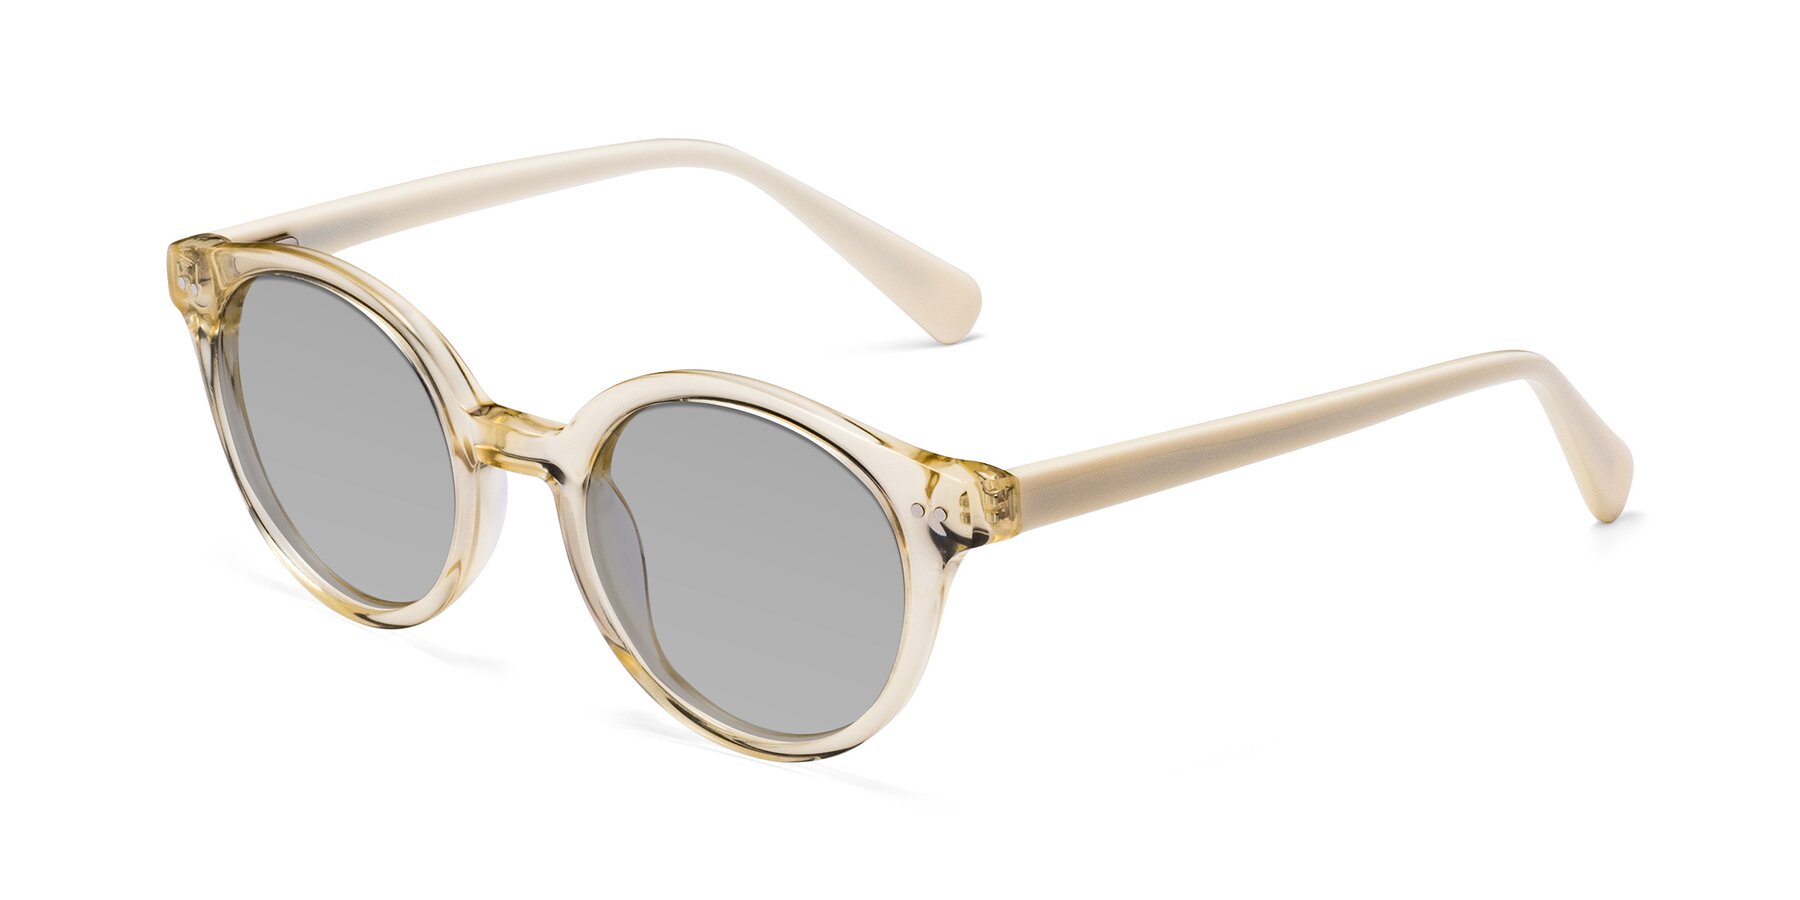 Angle of Bellion in Transparent Beige with Light Gray Tinted Lenses